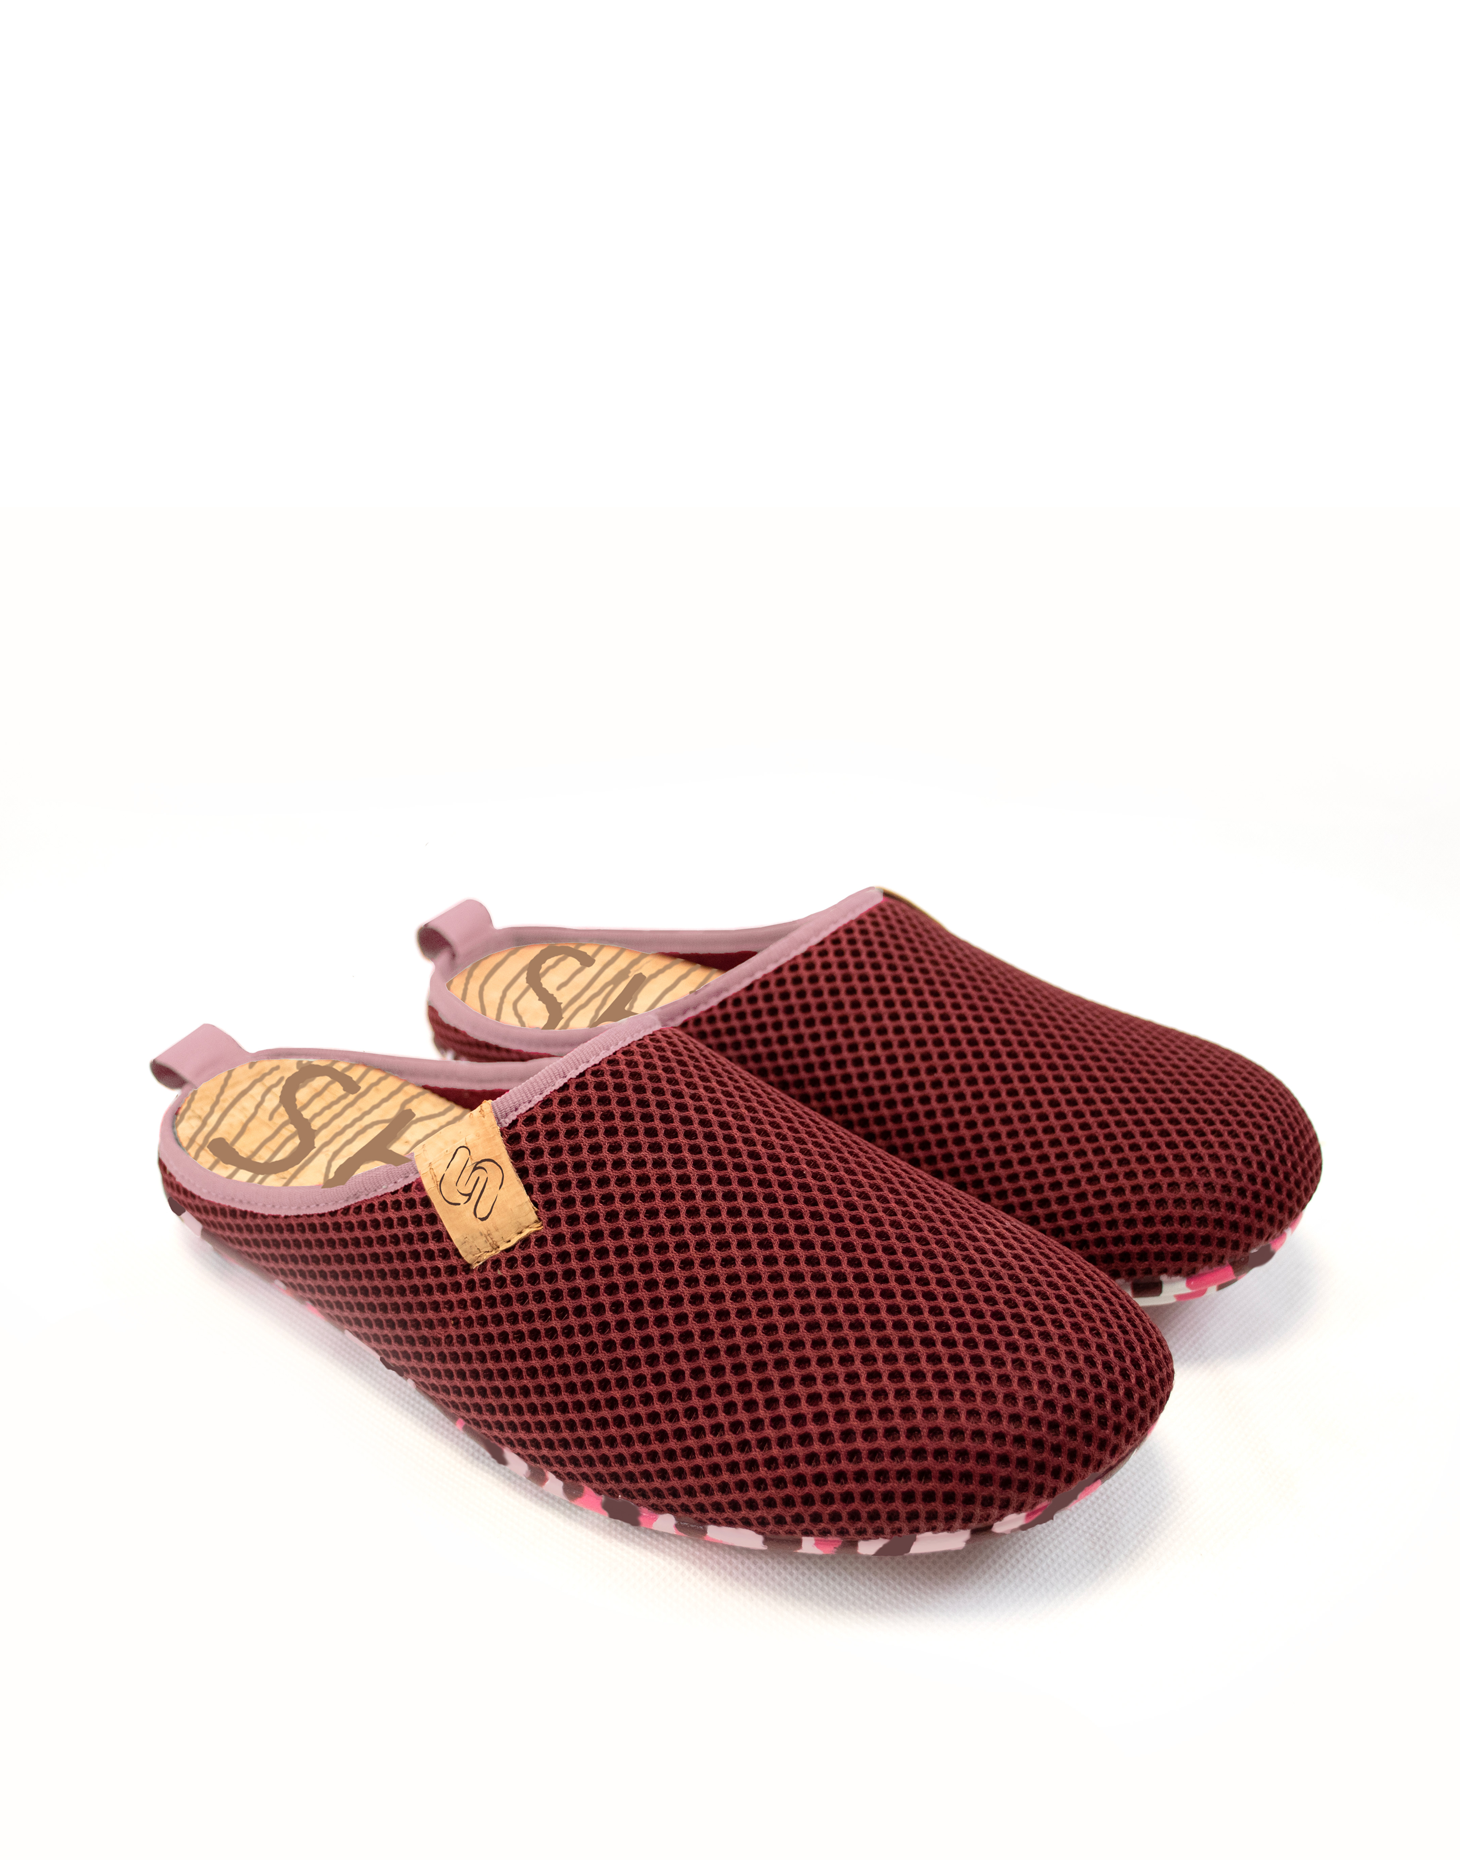 Amelia Women's Berry Casual Mules